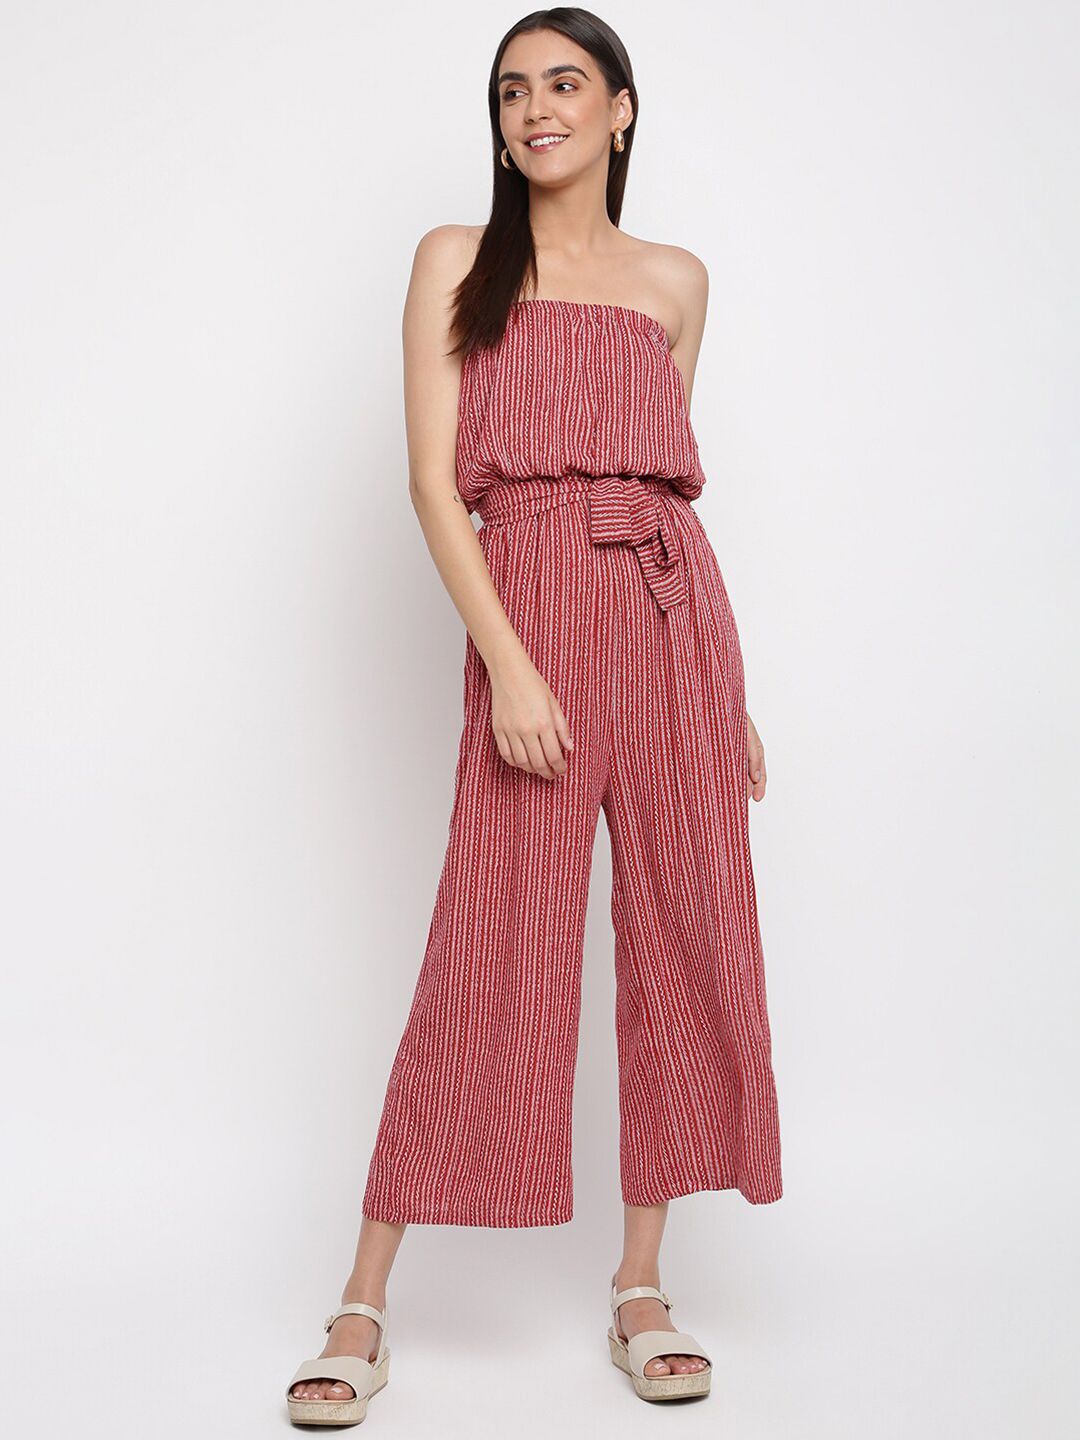 iki chic Red Printed Basic Jumpsuit Price in India